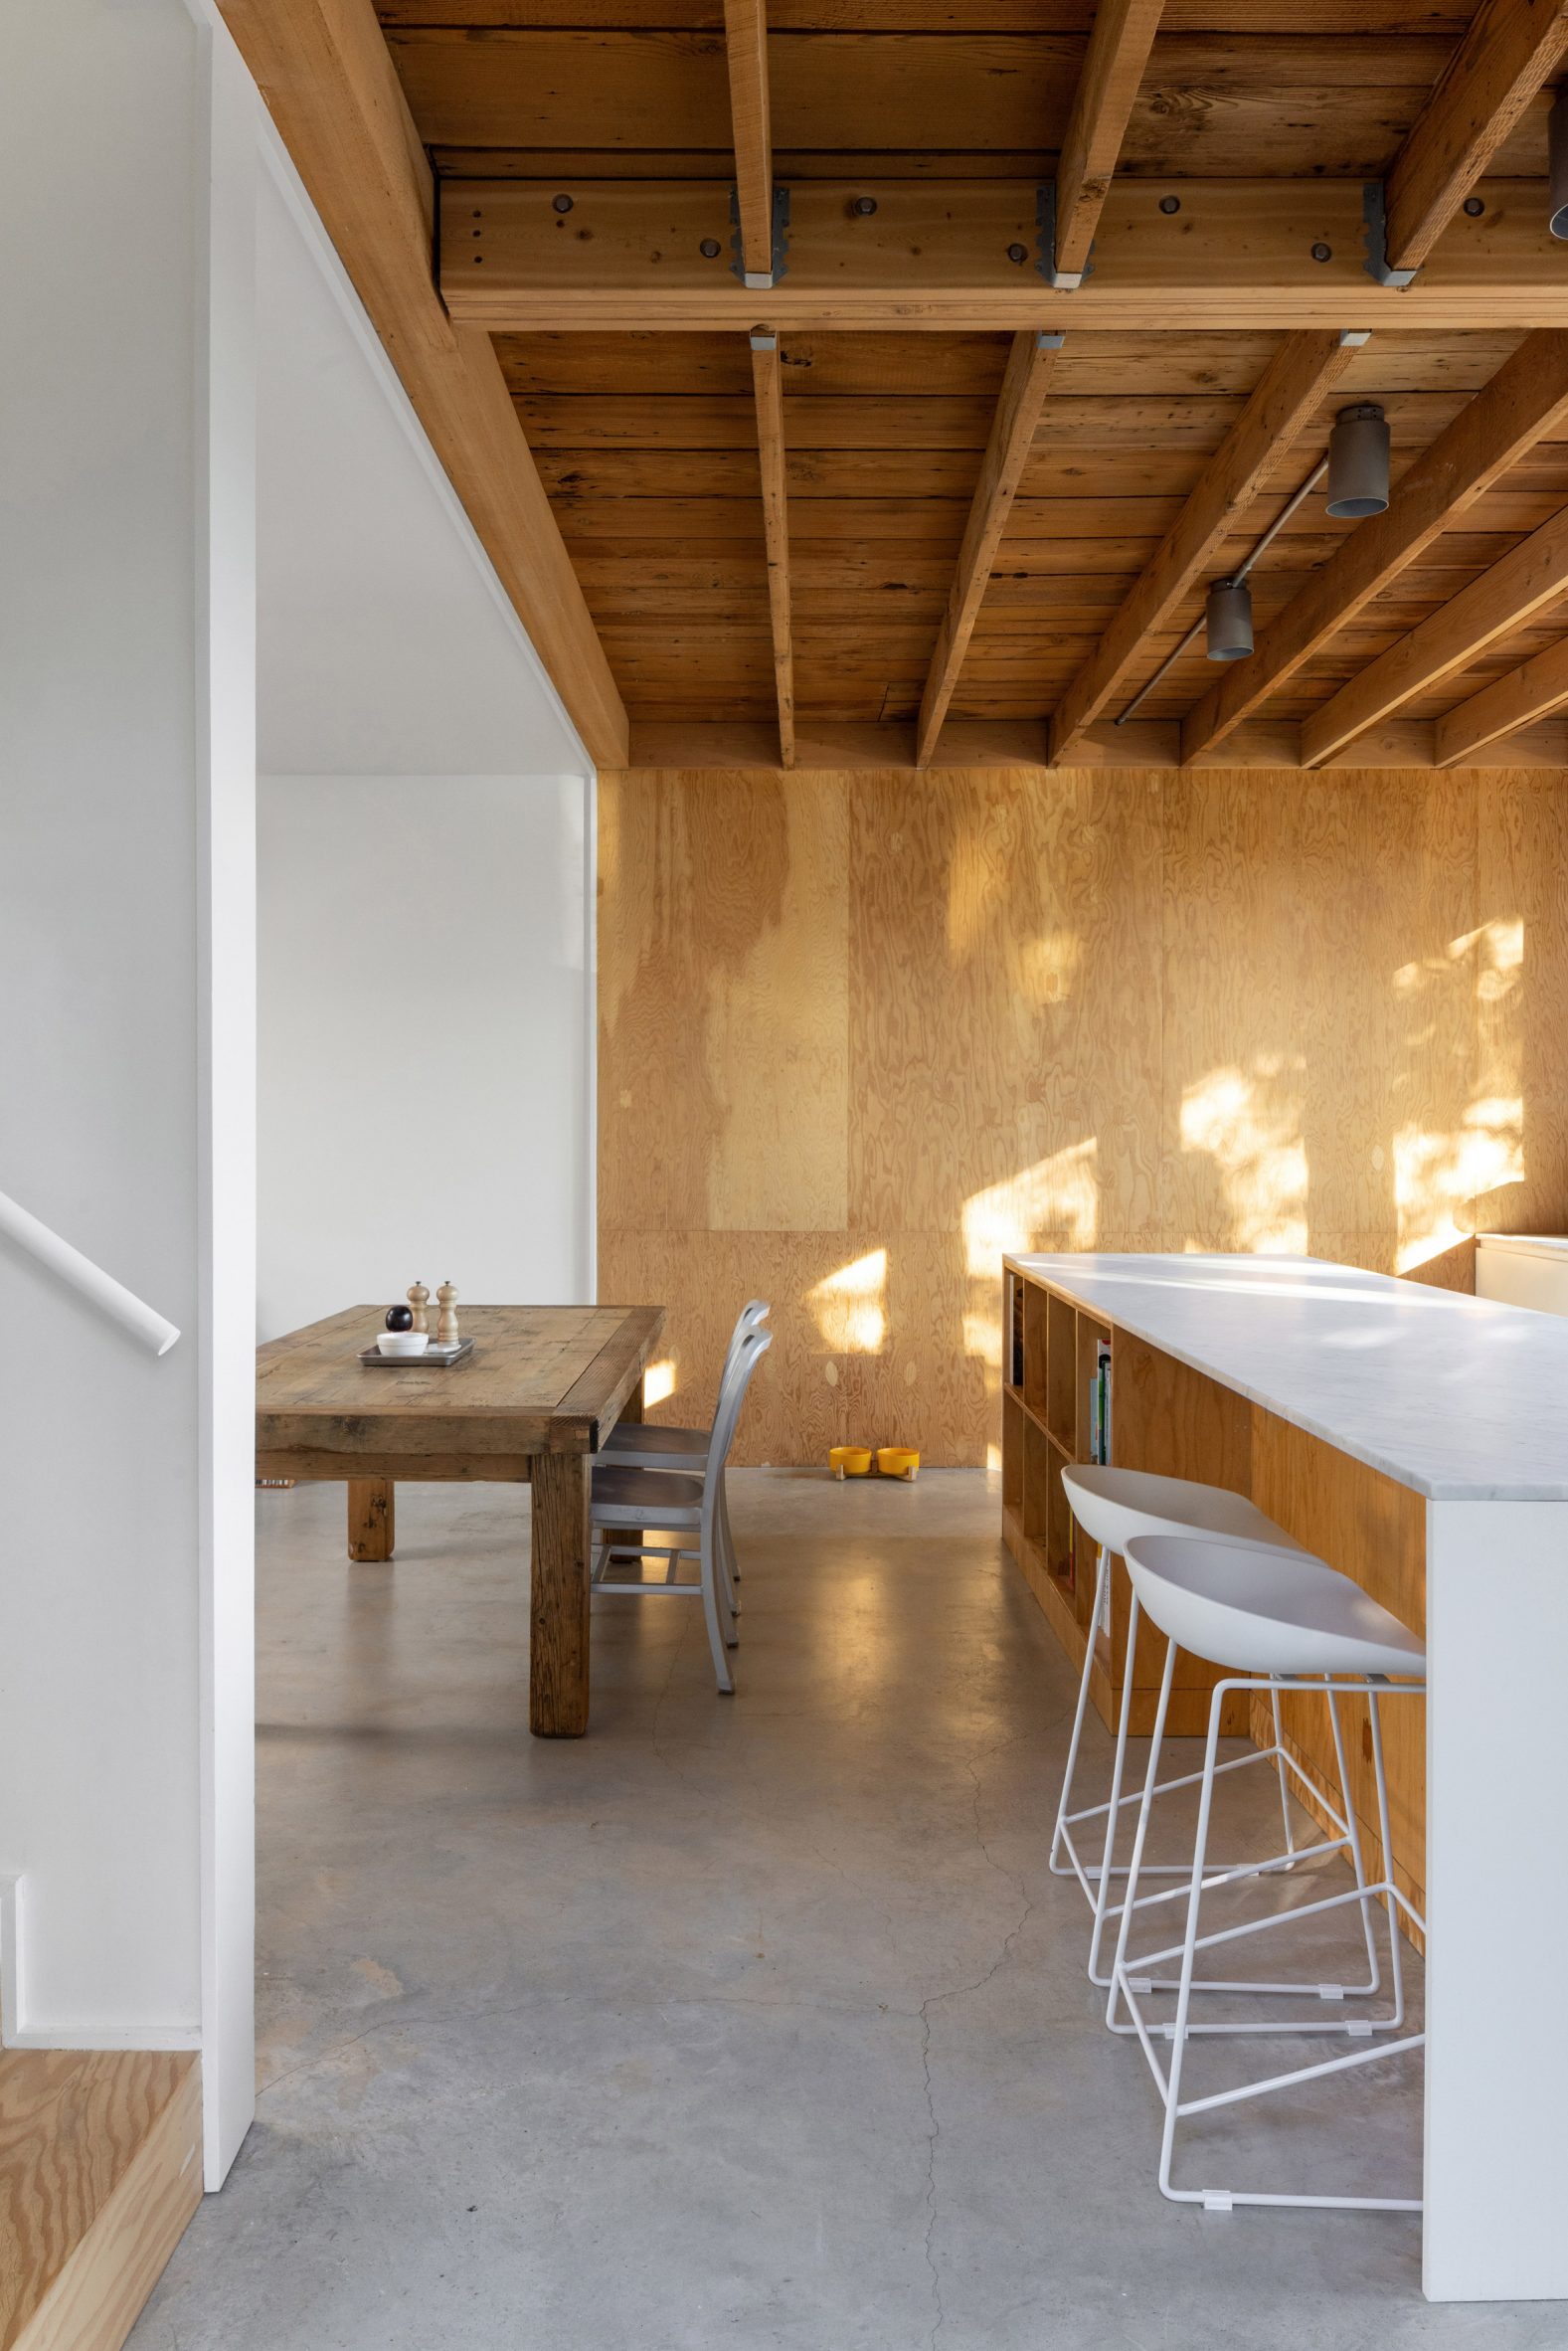 d’arcy jones adds subterranean garage to century-old house in vancouver